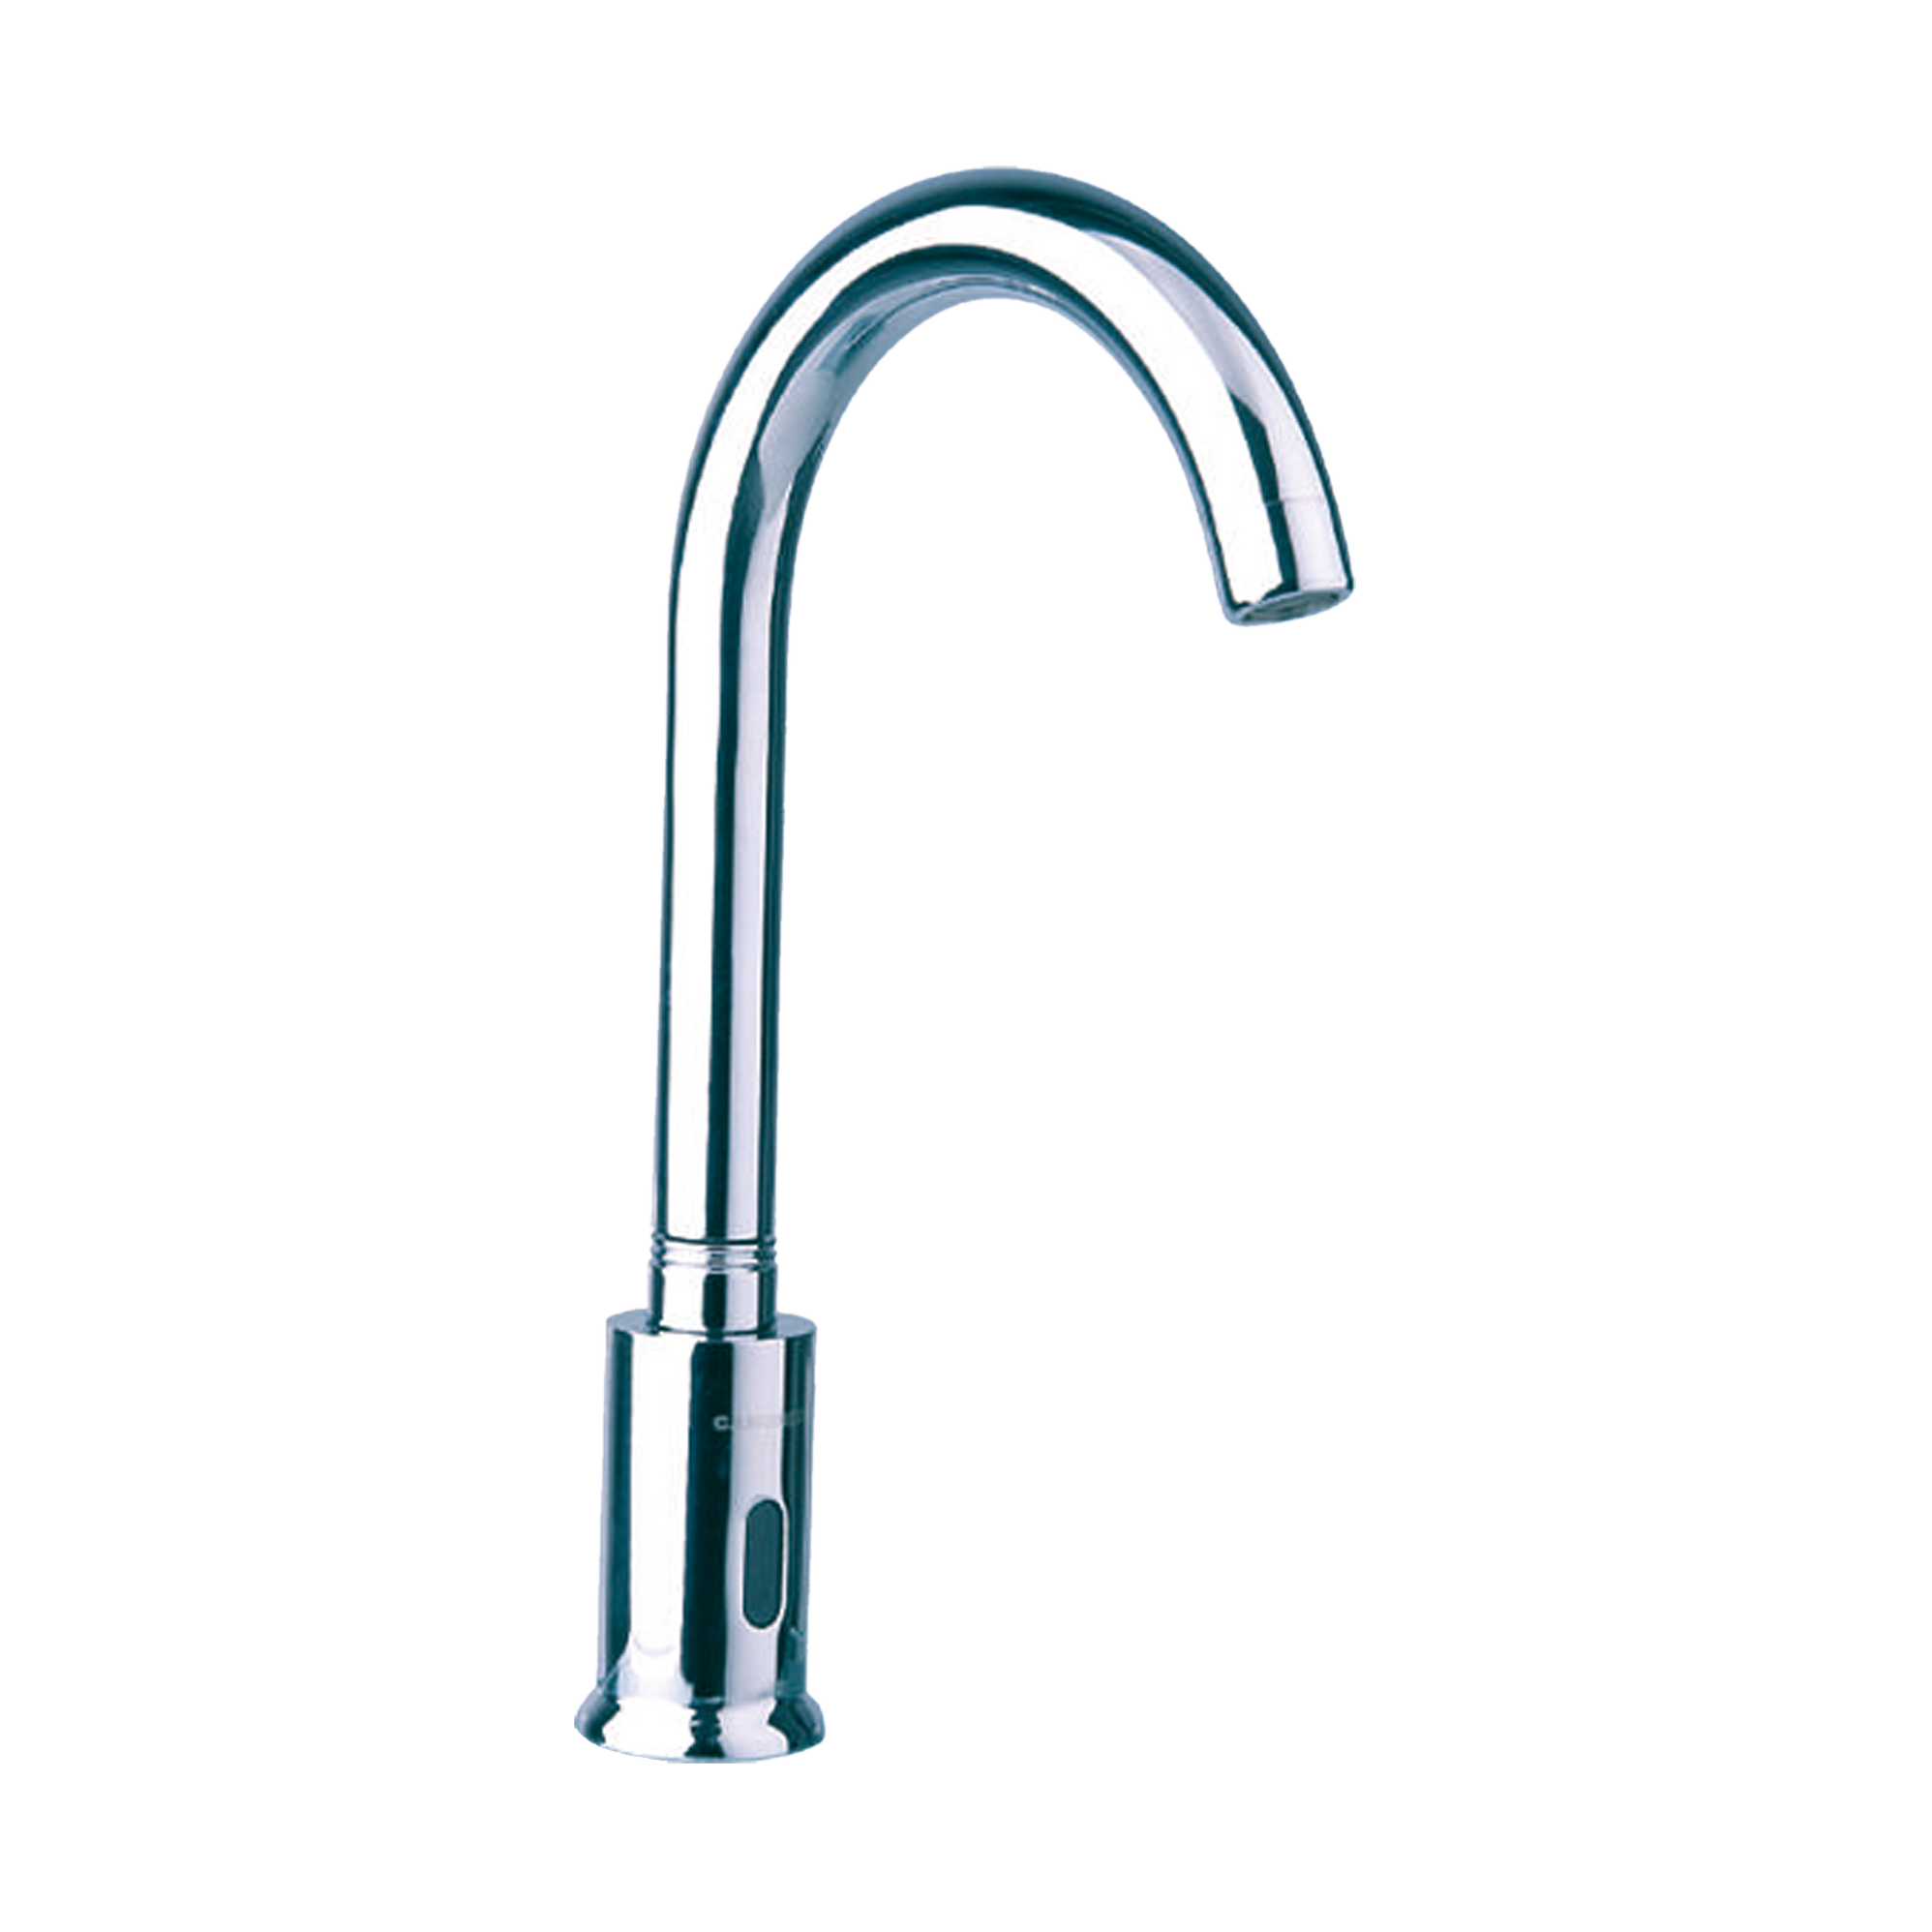 Top-rinse MS62D Single Hole Induction Faucet